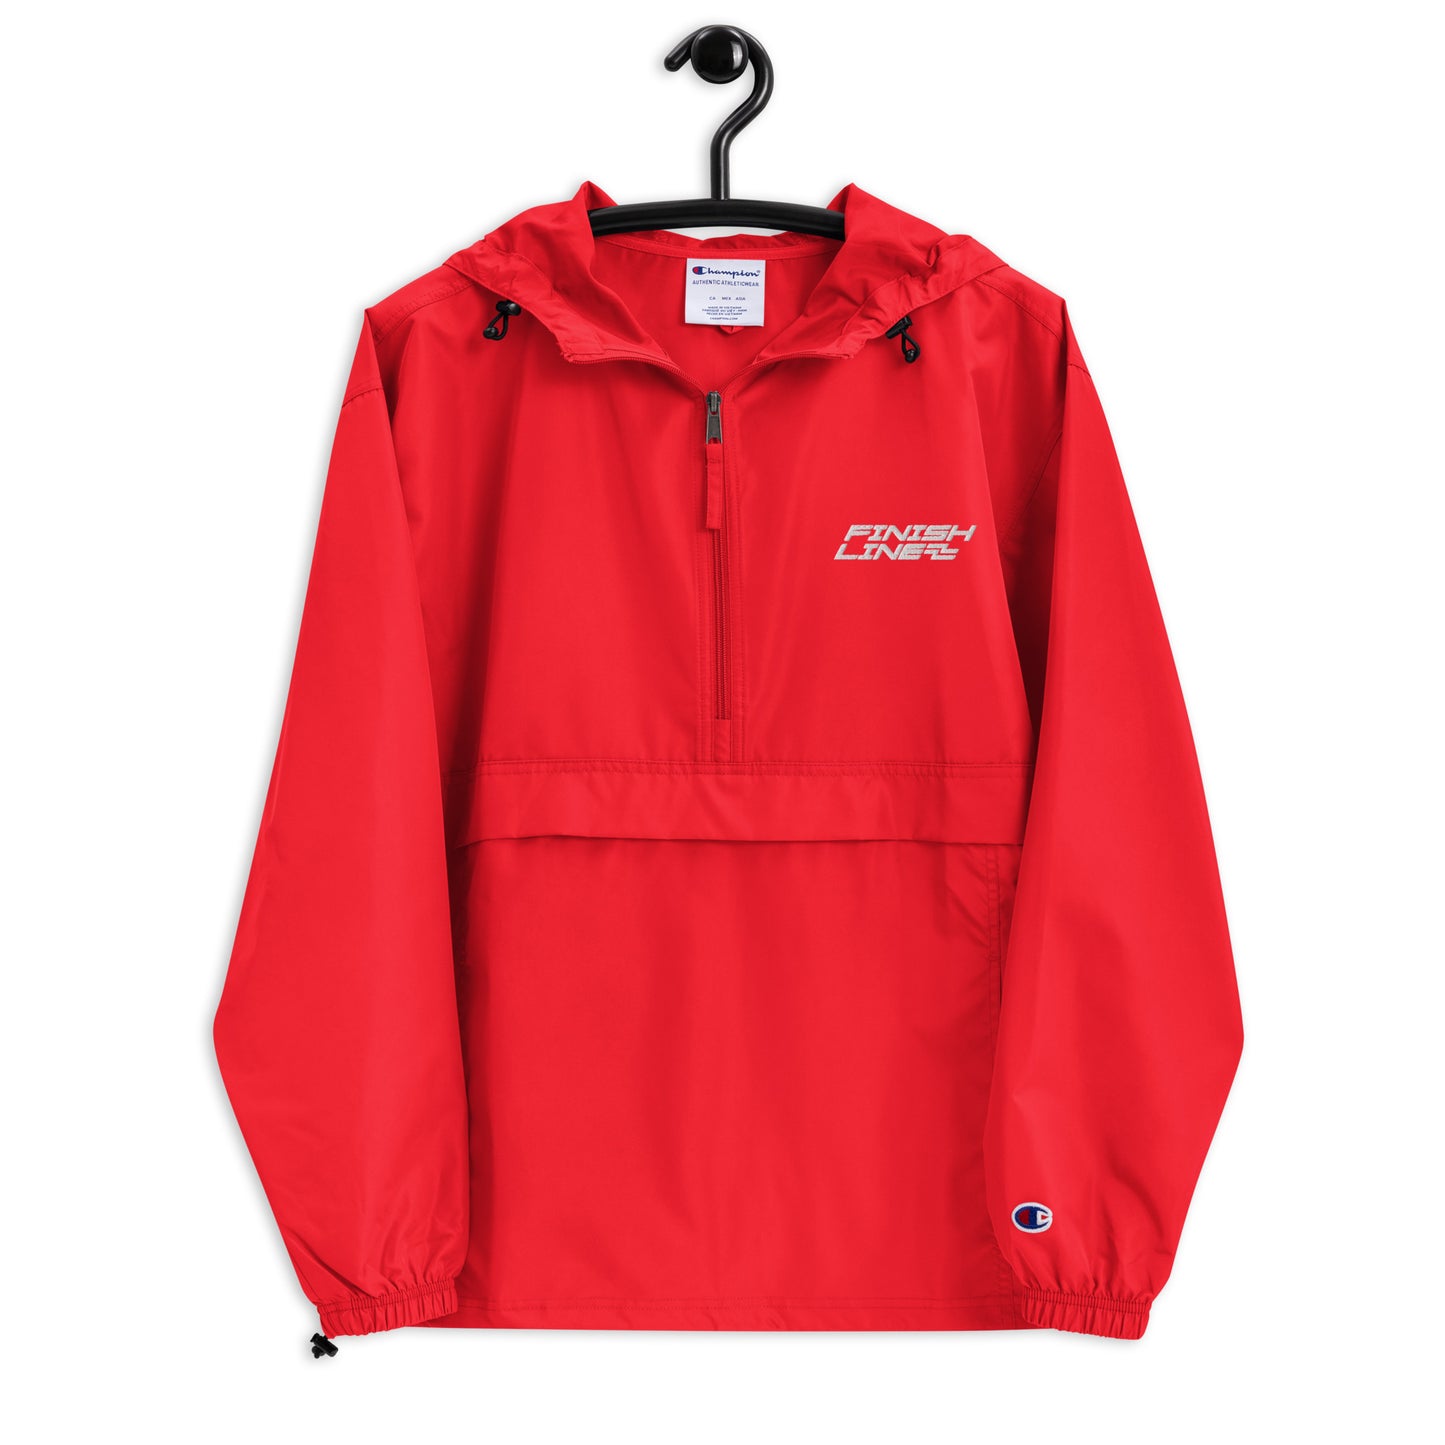 Team Champion Packable Jacket